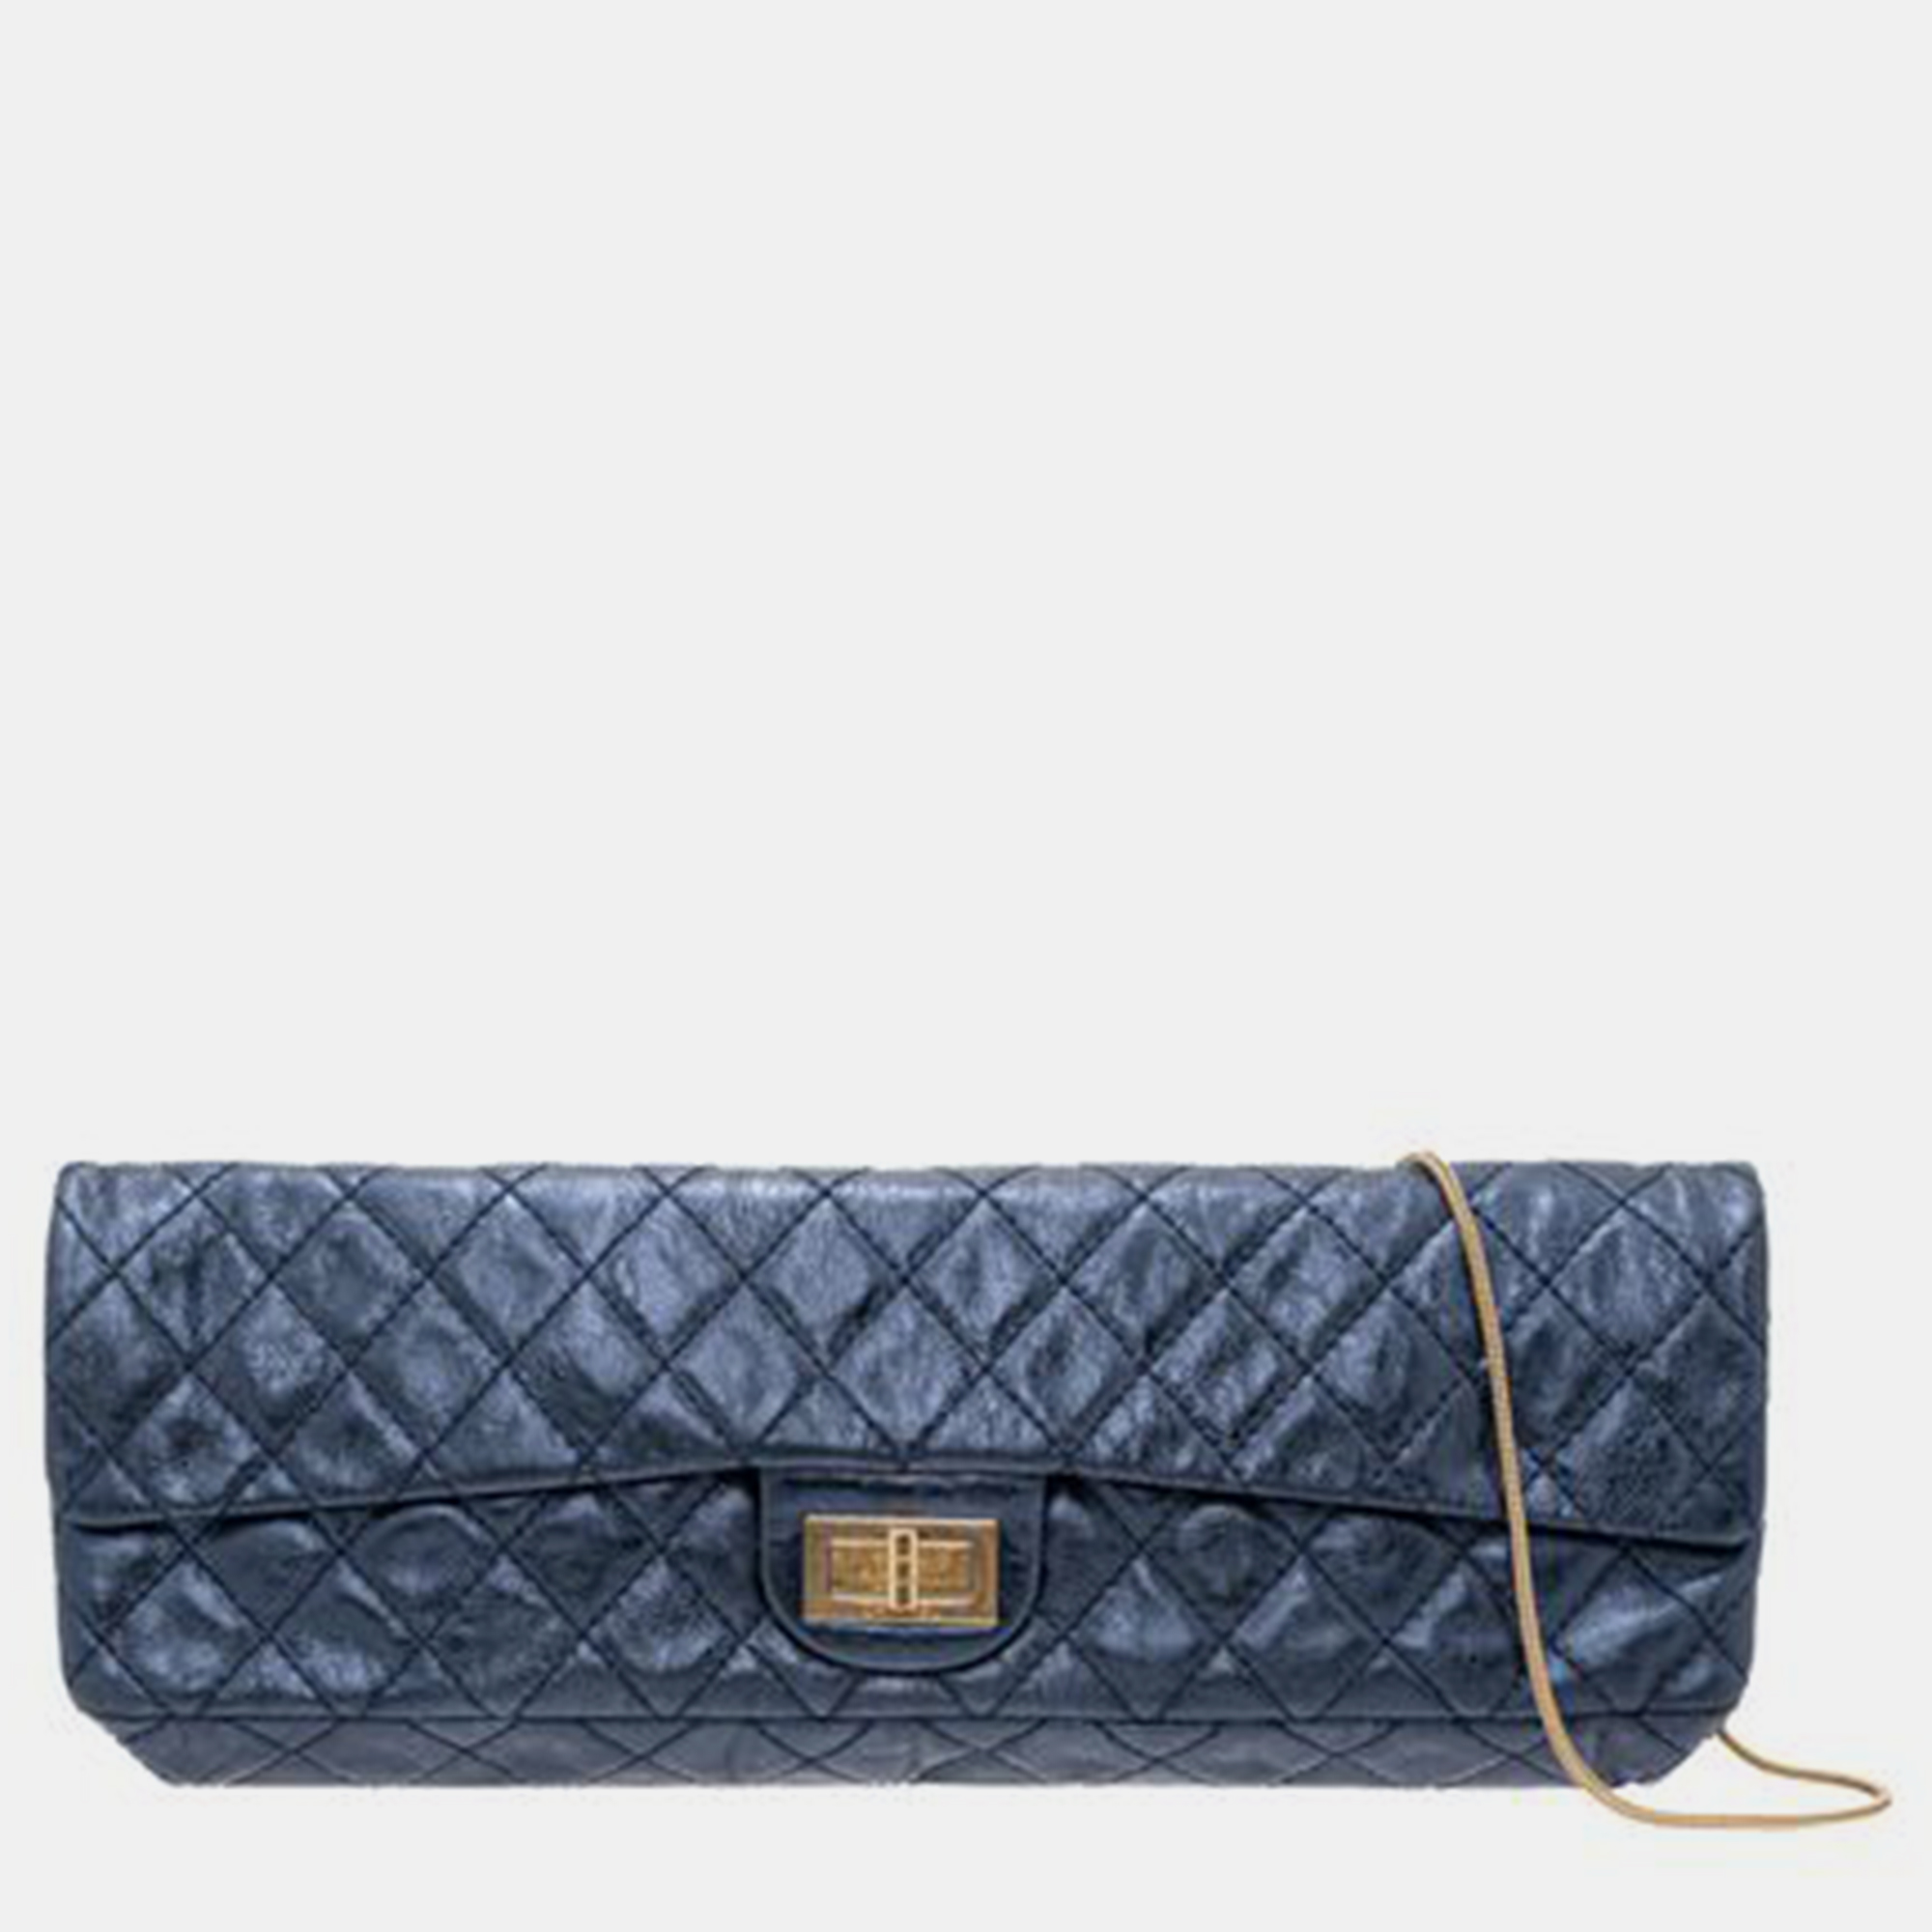 CHANEL East West Metallic Blue Quilted Leather SHOULDER BAGS